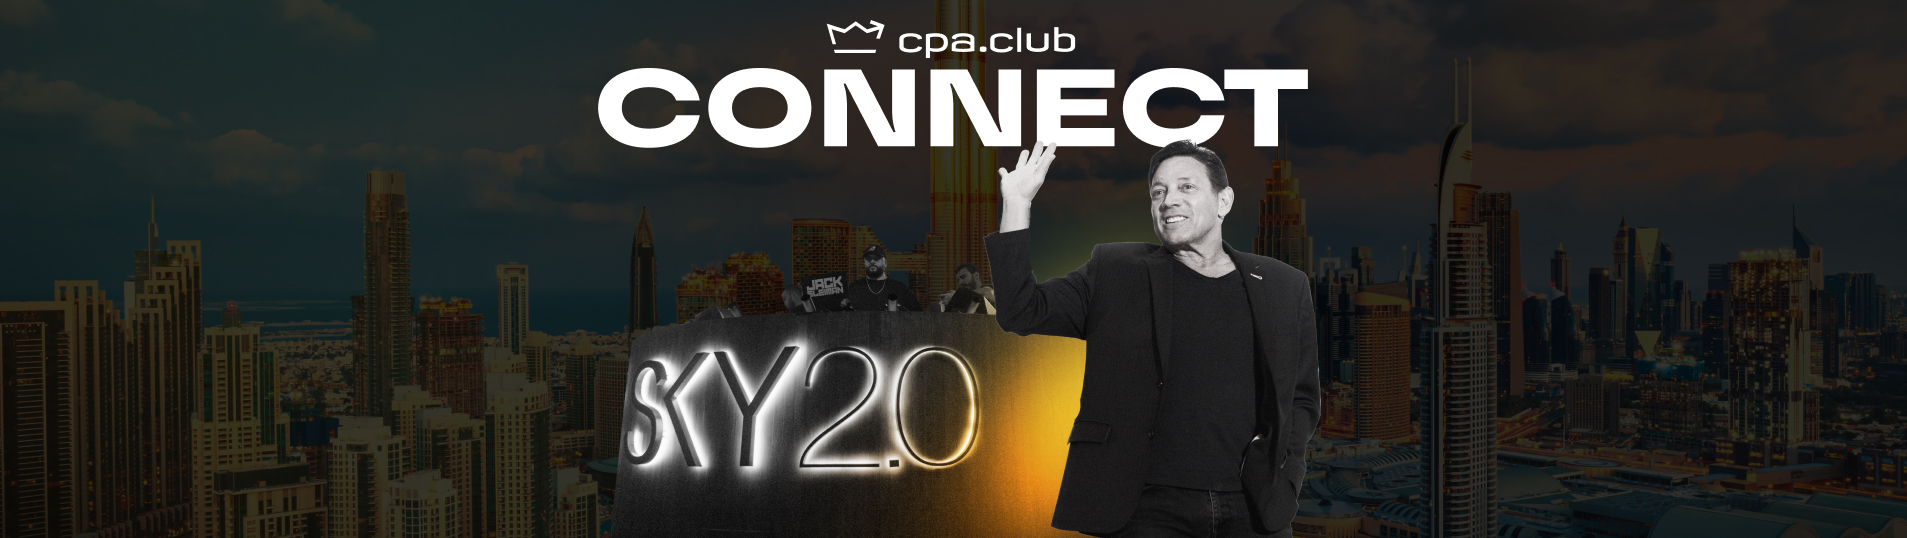 CPA.Club Connect - Cover